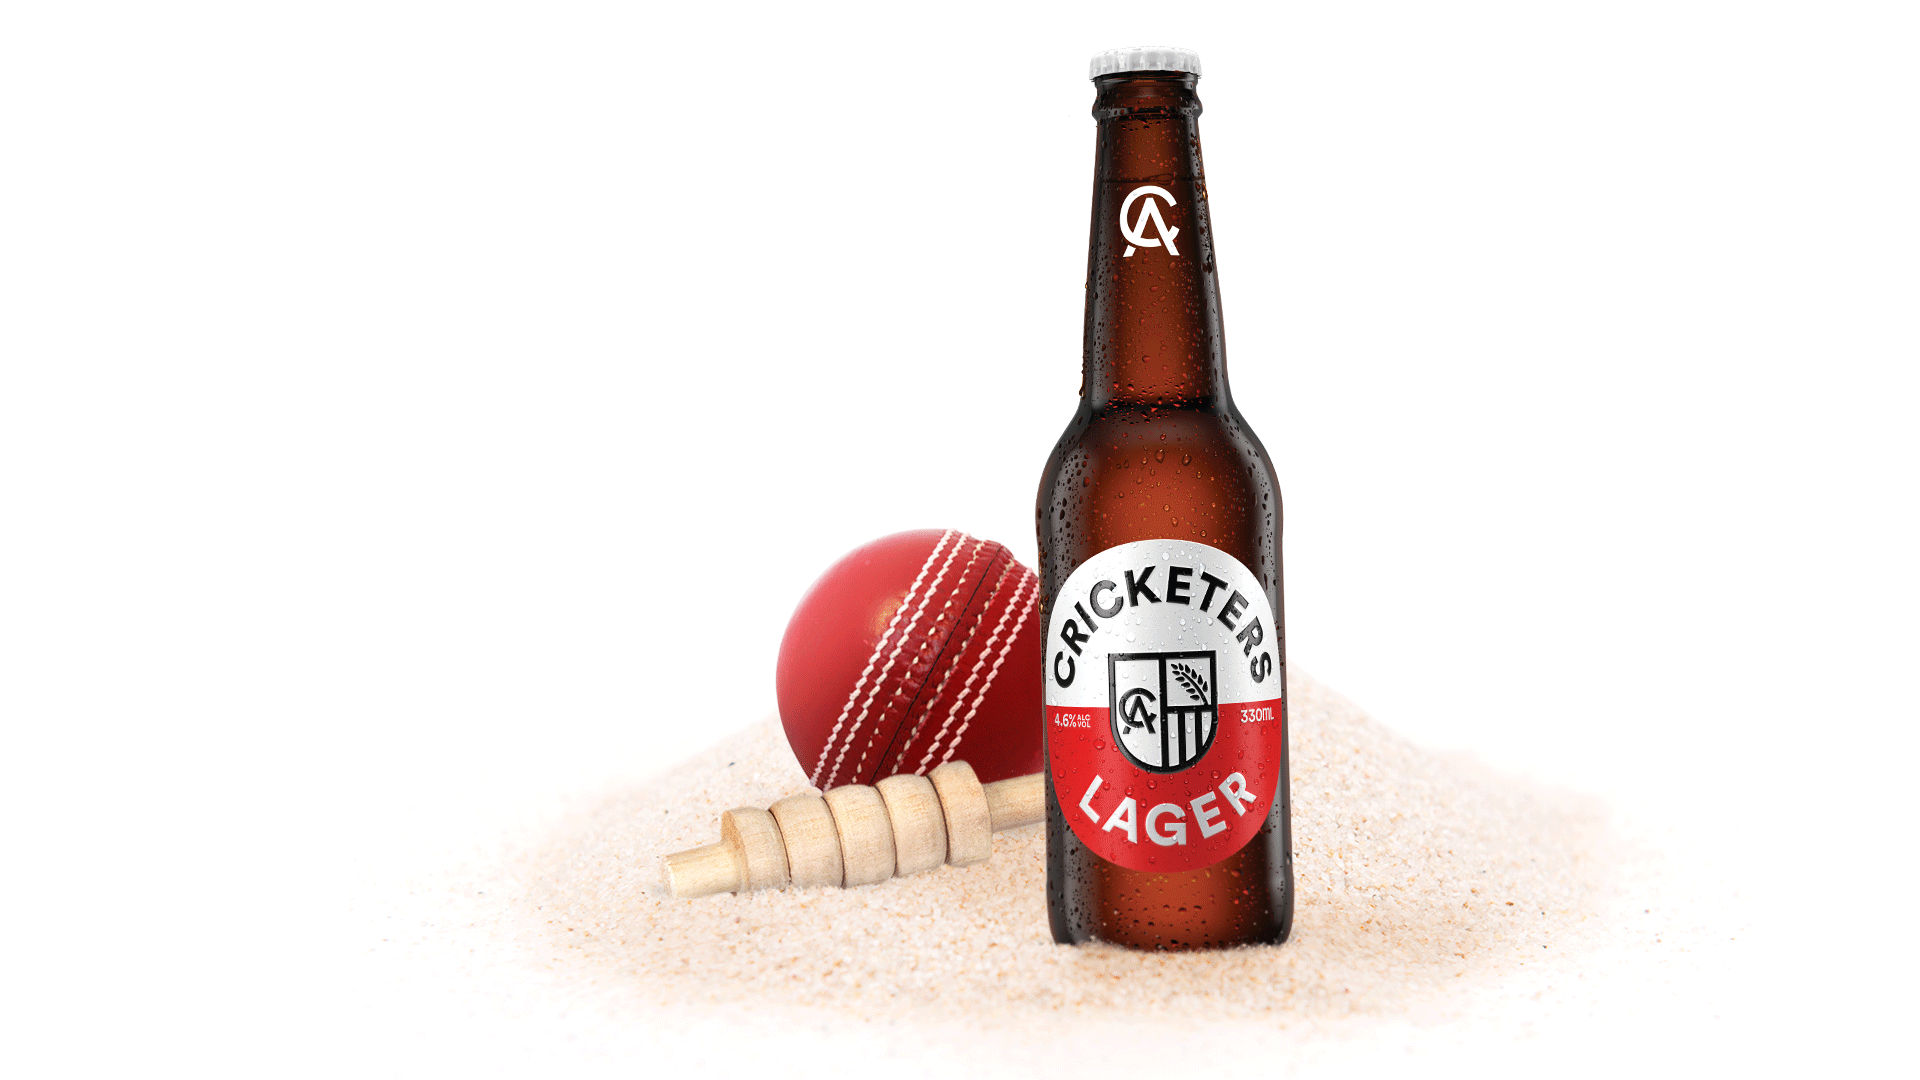 Crickets Lager bottle branding sitting in a pile of sand next to a cricket stump and cricket ball.